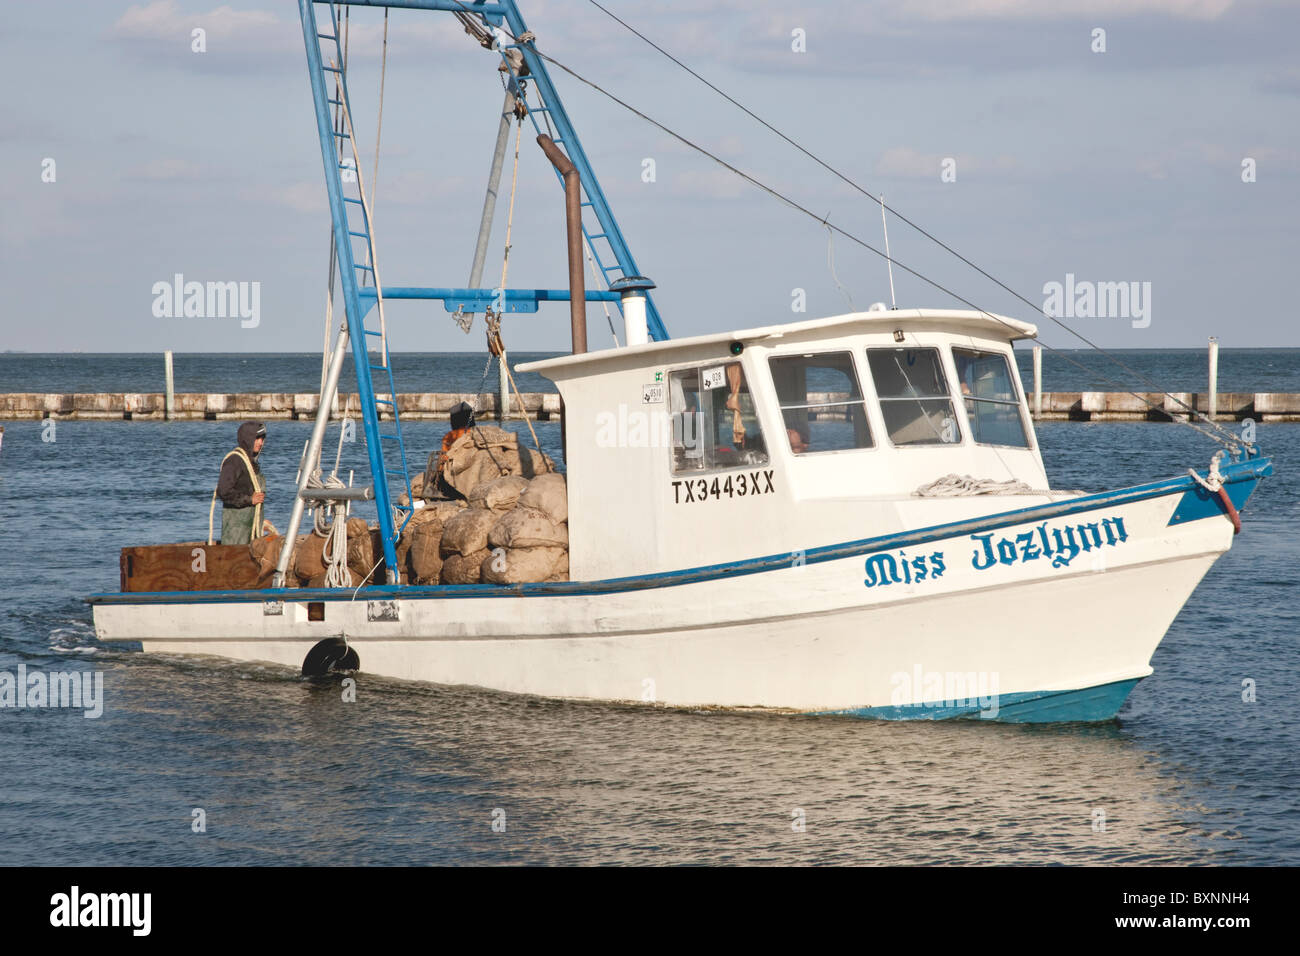 Boat carrying harvested bagged oysters, Stock Photo